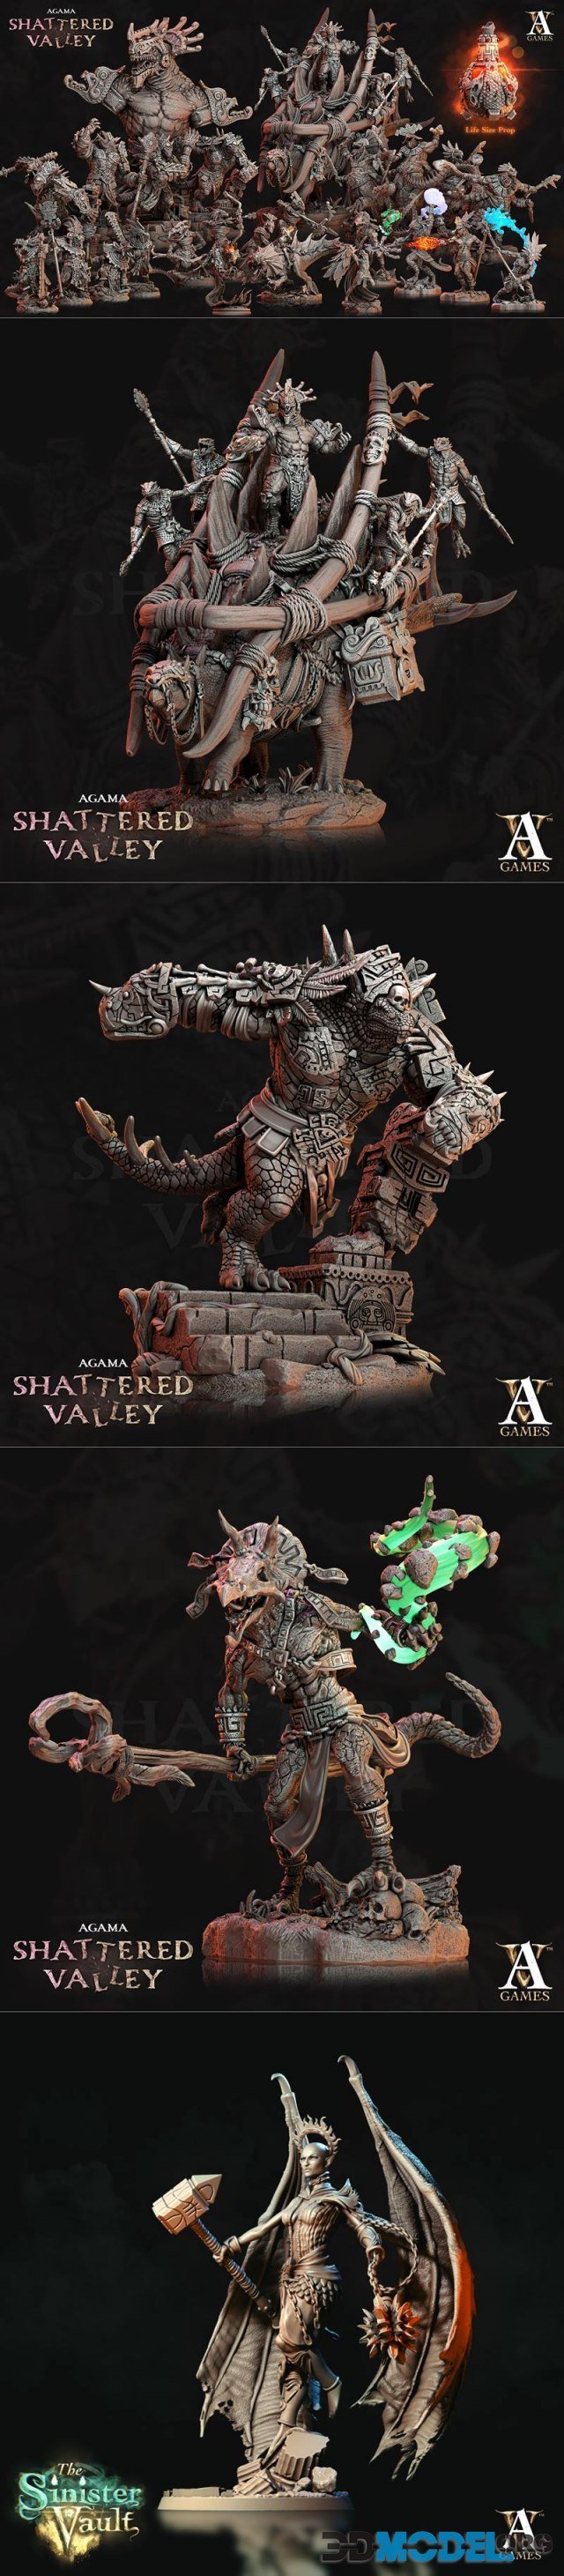 Archvillain Games - Agama Shattered Valley August 2022 – Printable